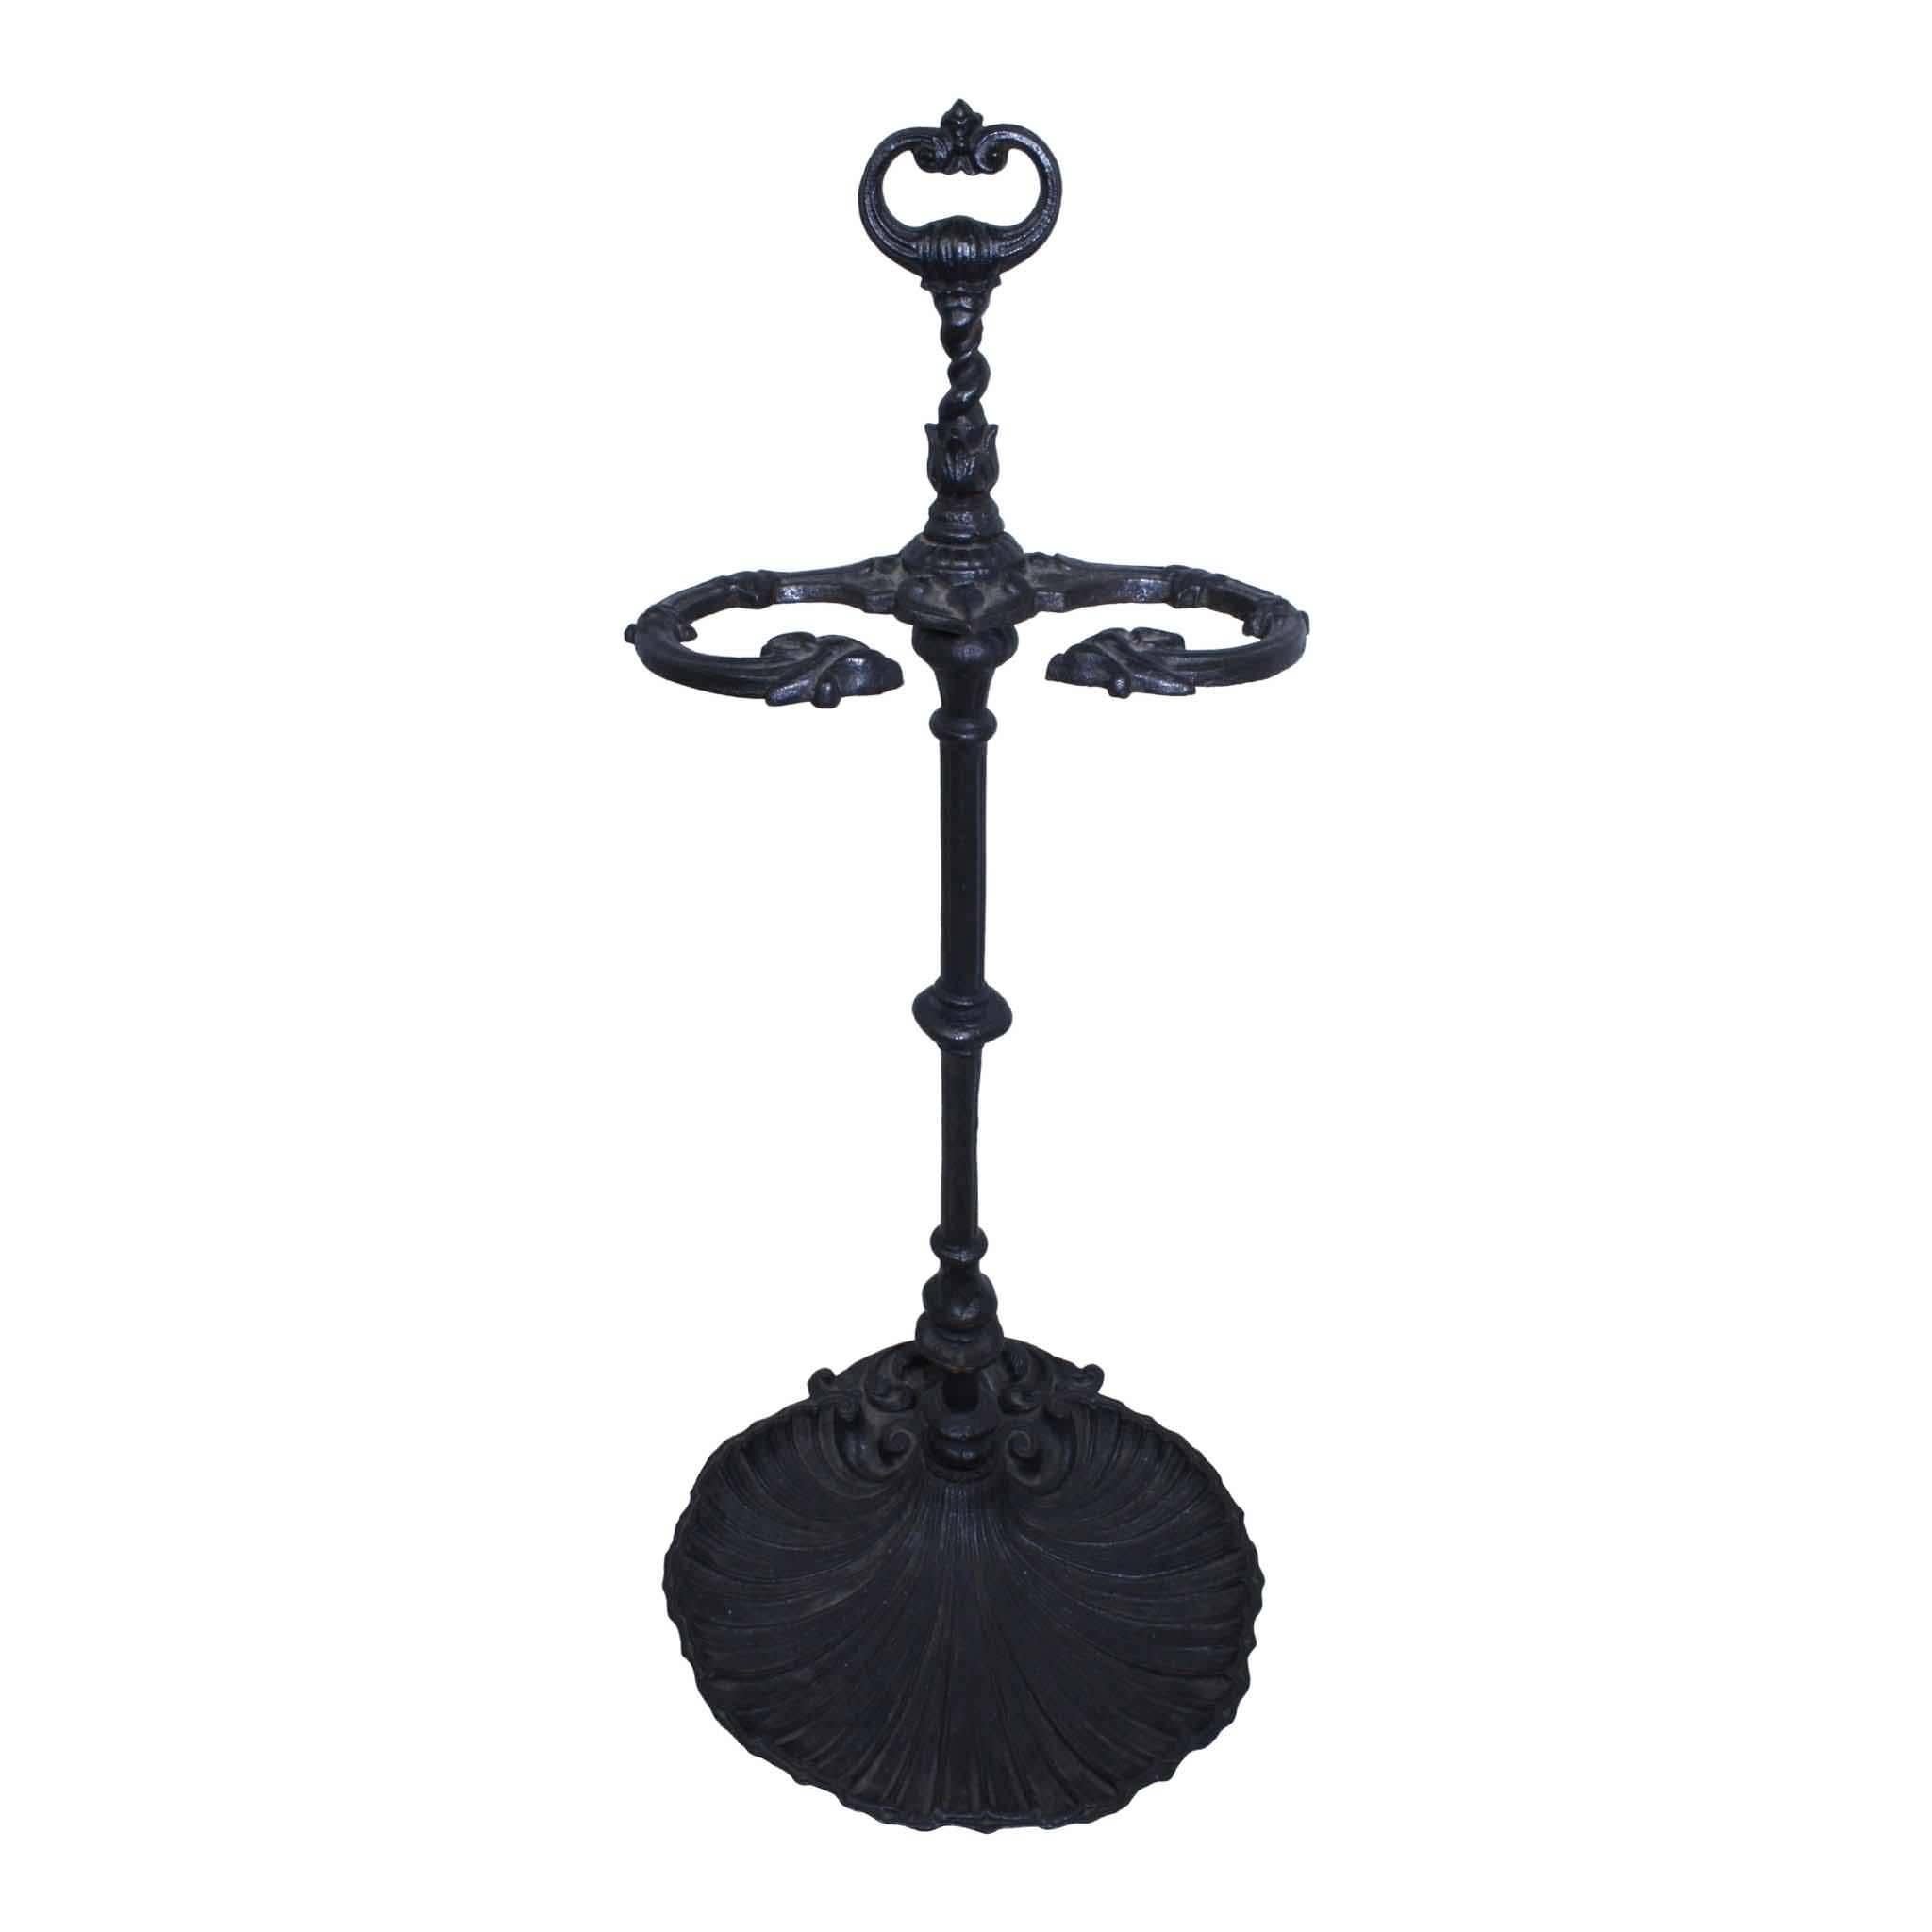 Add to the charm of your fireplace or hearth with this four piece antique set of three tools and a cast iron Stand. The tray of the Stand is the shape of a sea shell. The shovel, poker, and tongs have a matching turned top with a different finial on